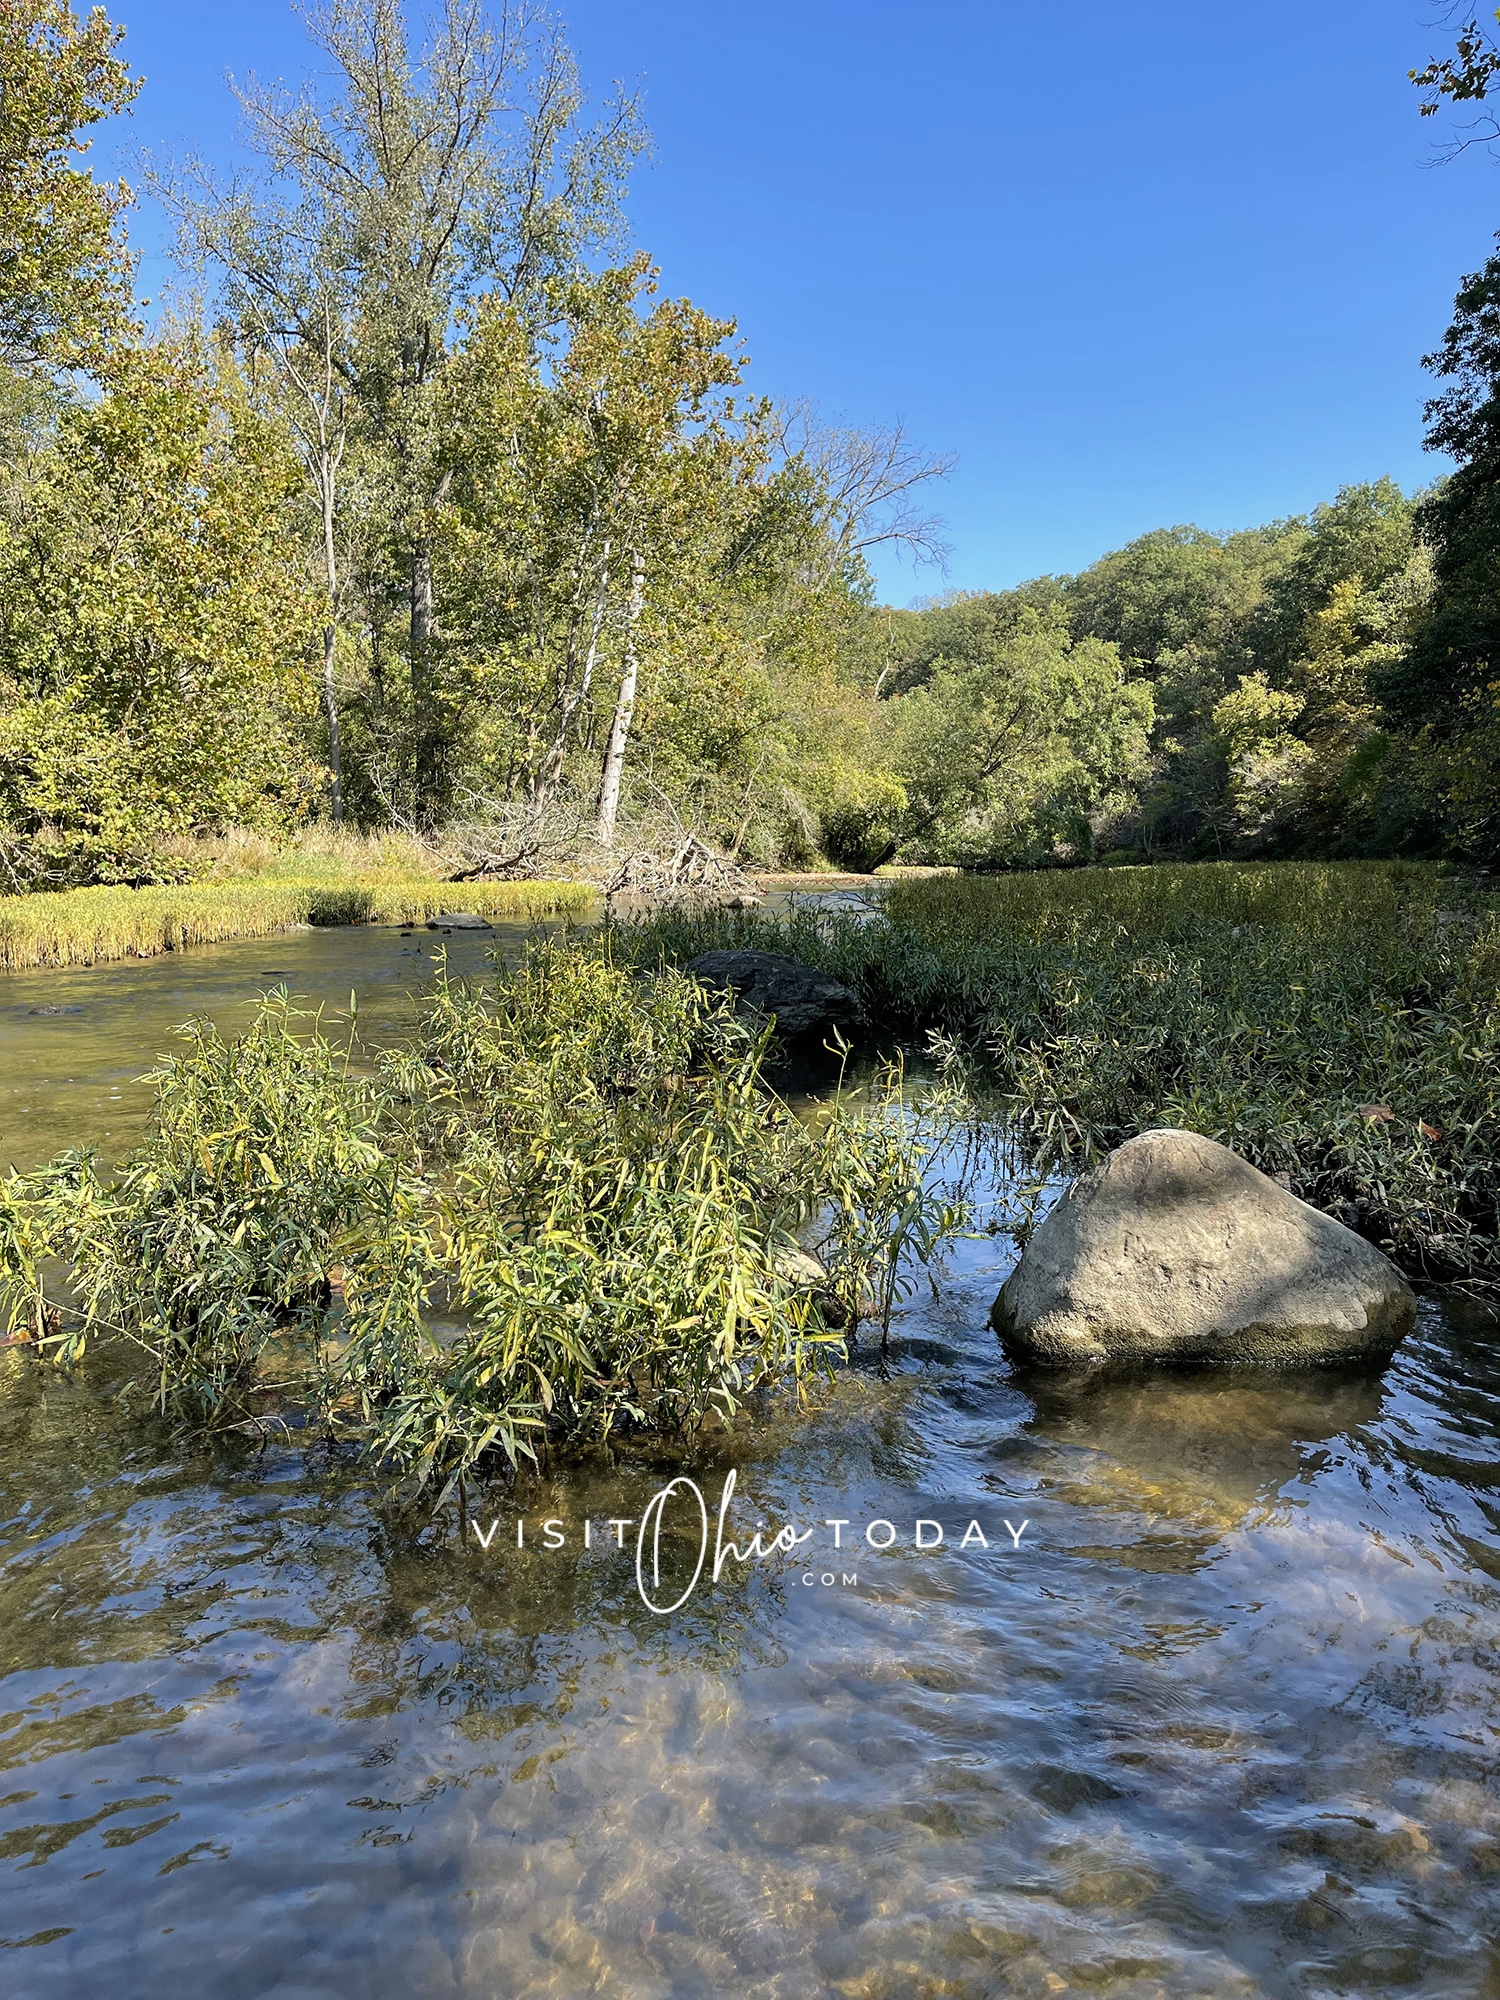 vertical photo showing the creek at batelle darby creek metro park with a large rock in the water and a bank with trees and grass in the background